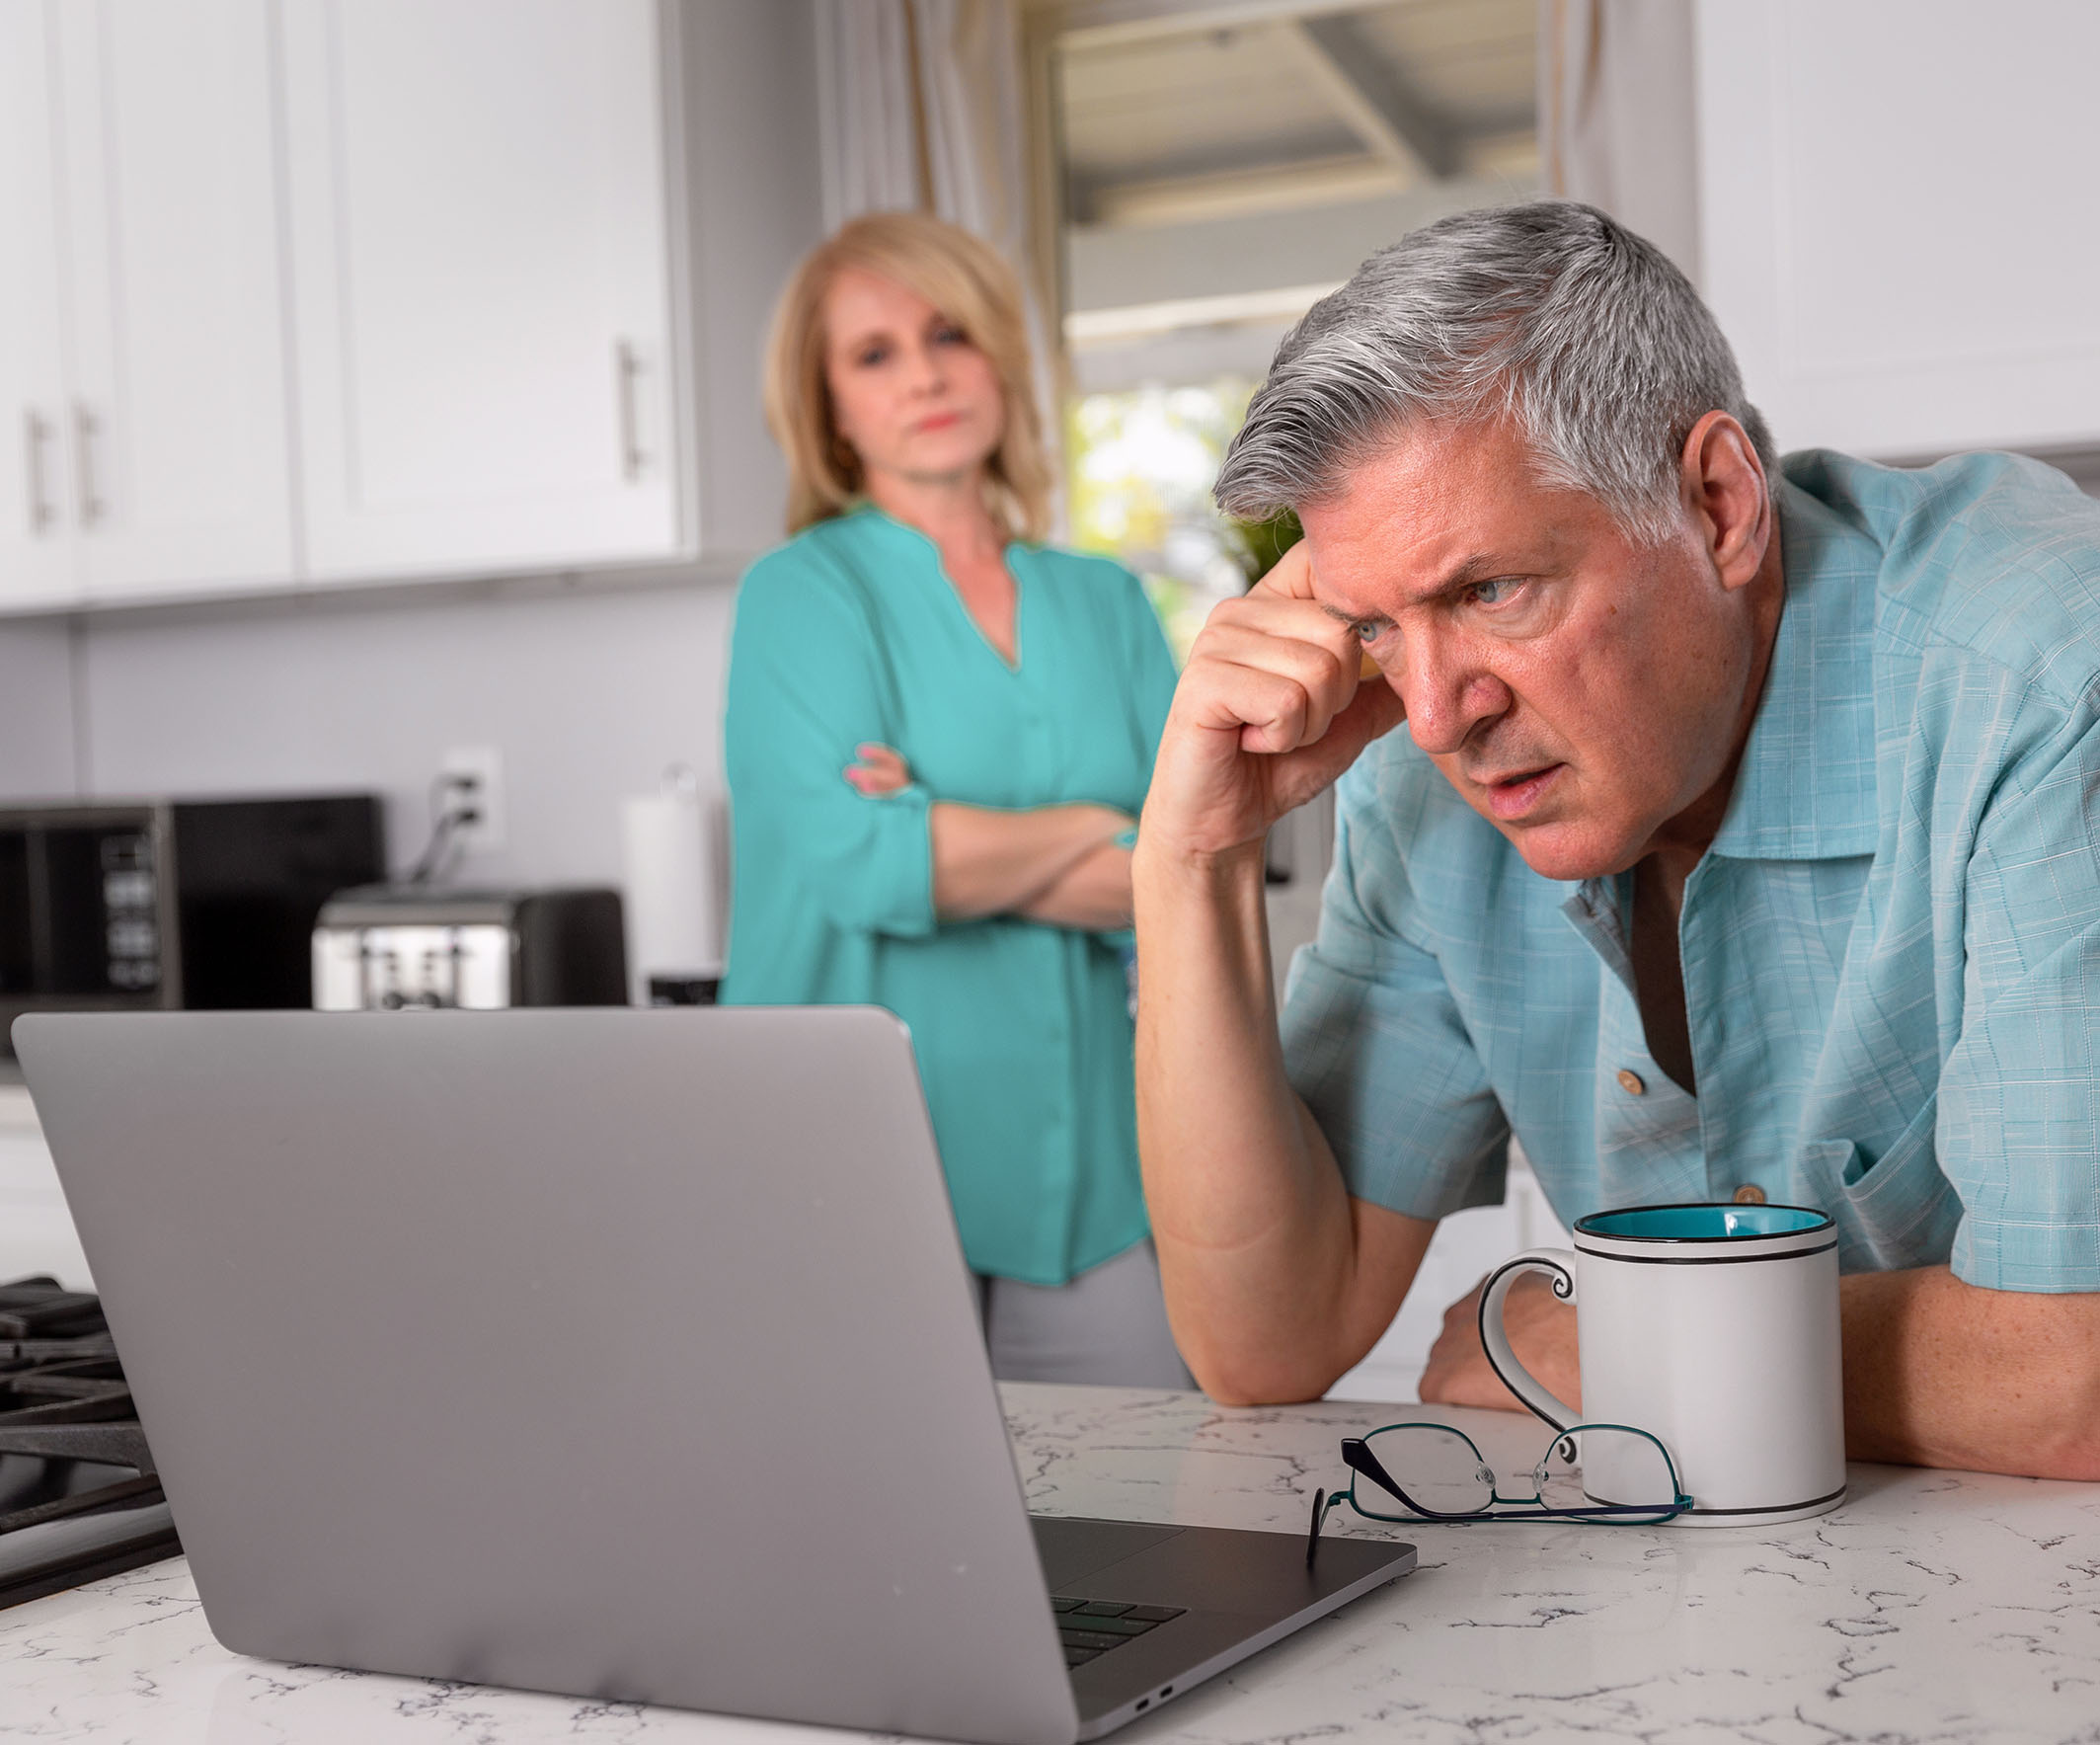 Senior man frustrated looking at laptop with woman